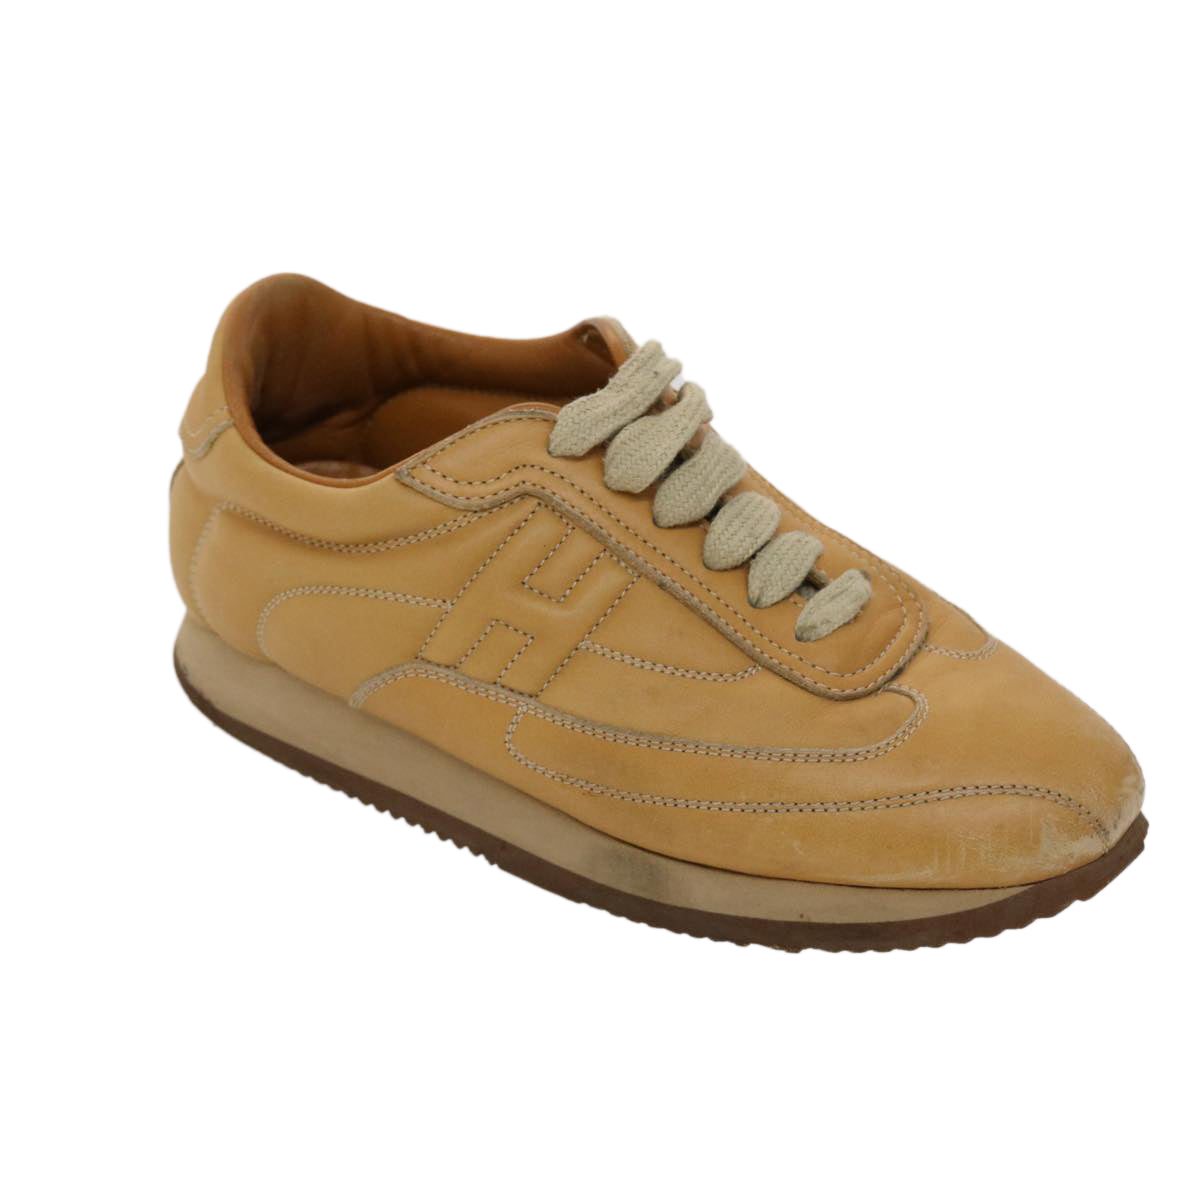 HERMES Quick Sneakers Leather 36 Beige Auth ar9855